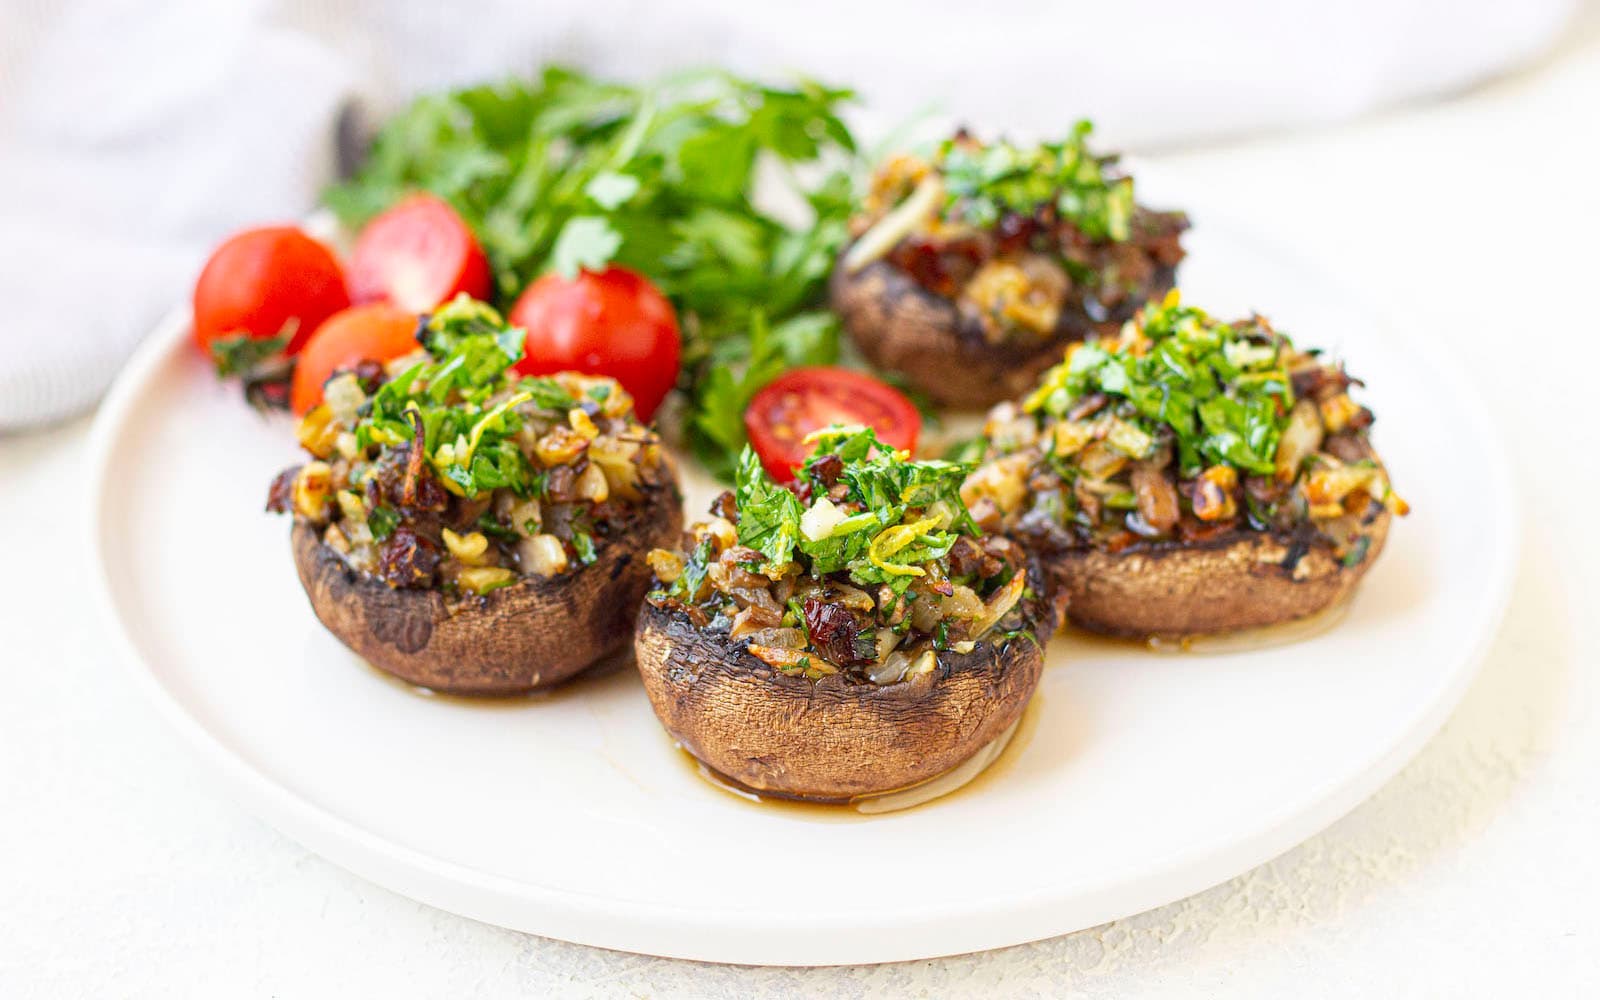 Four stuffed mushrooms with vegetablles on the side on a white plate.